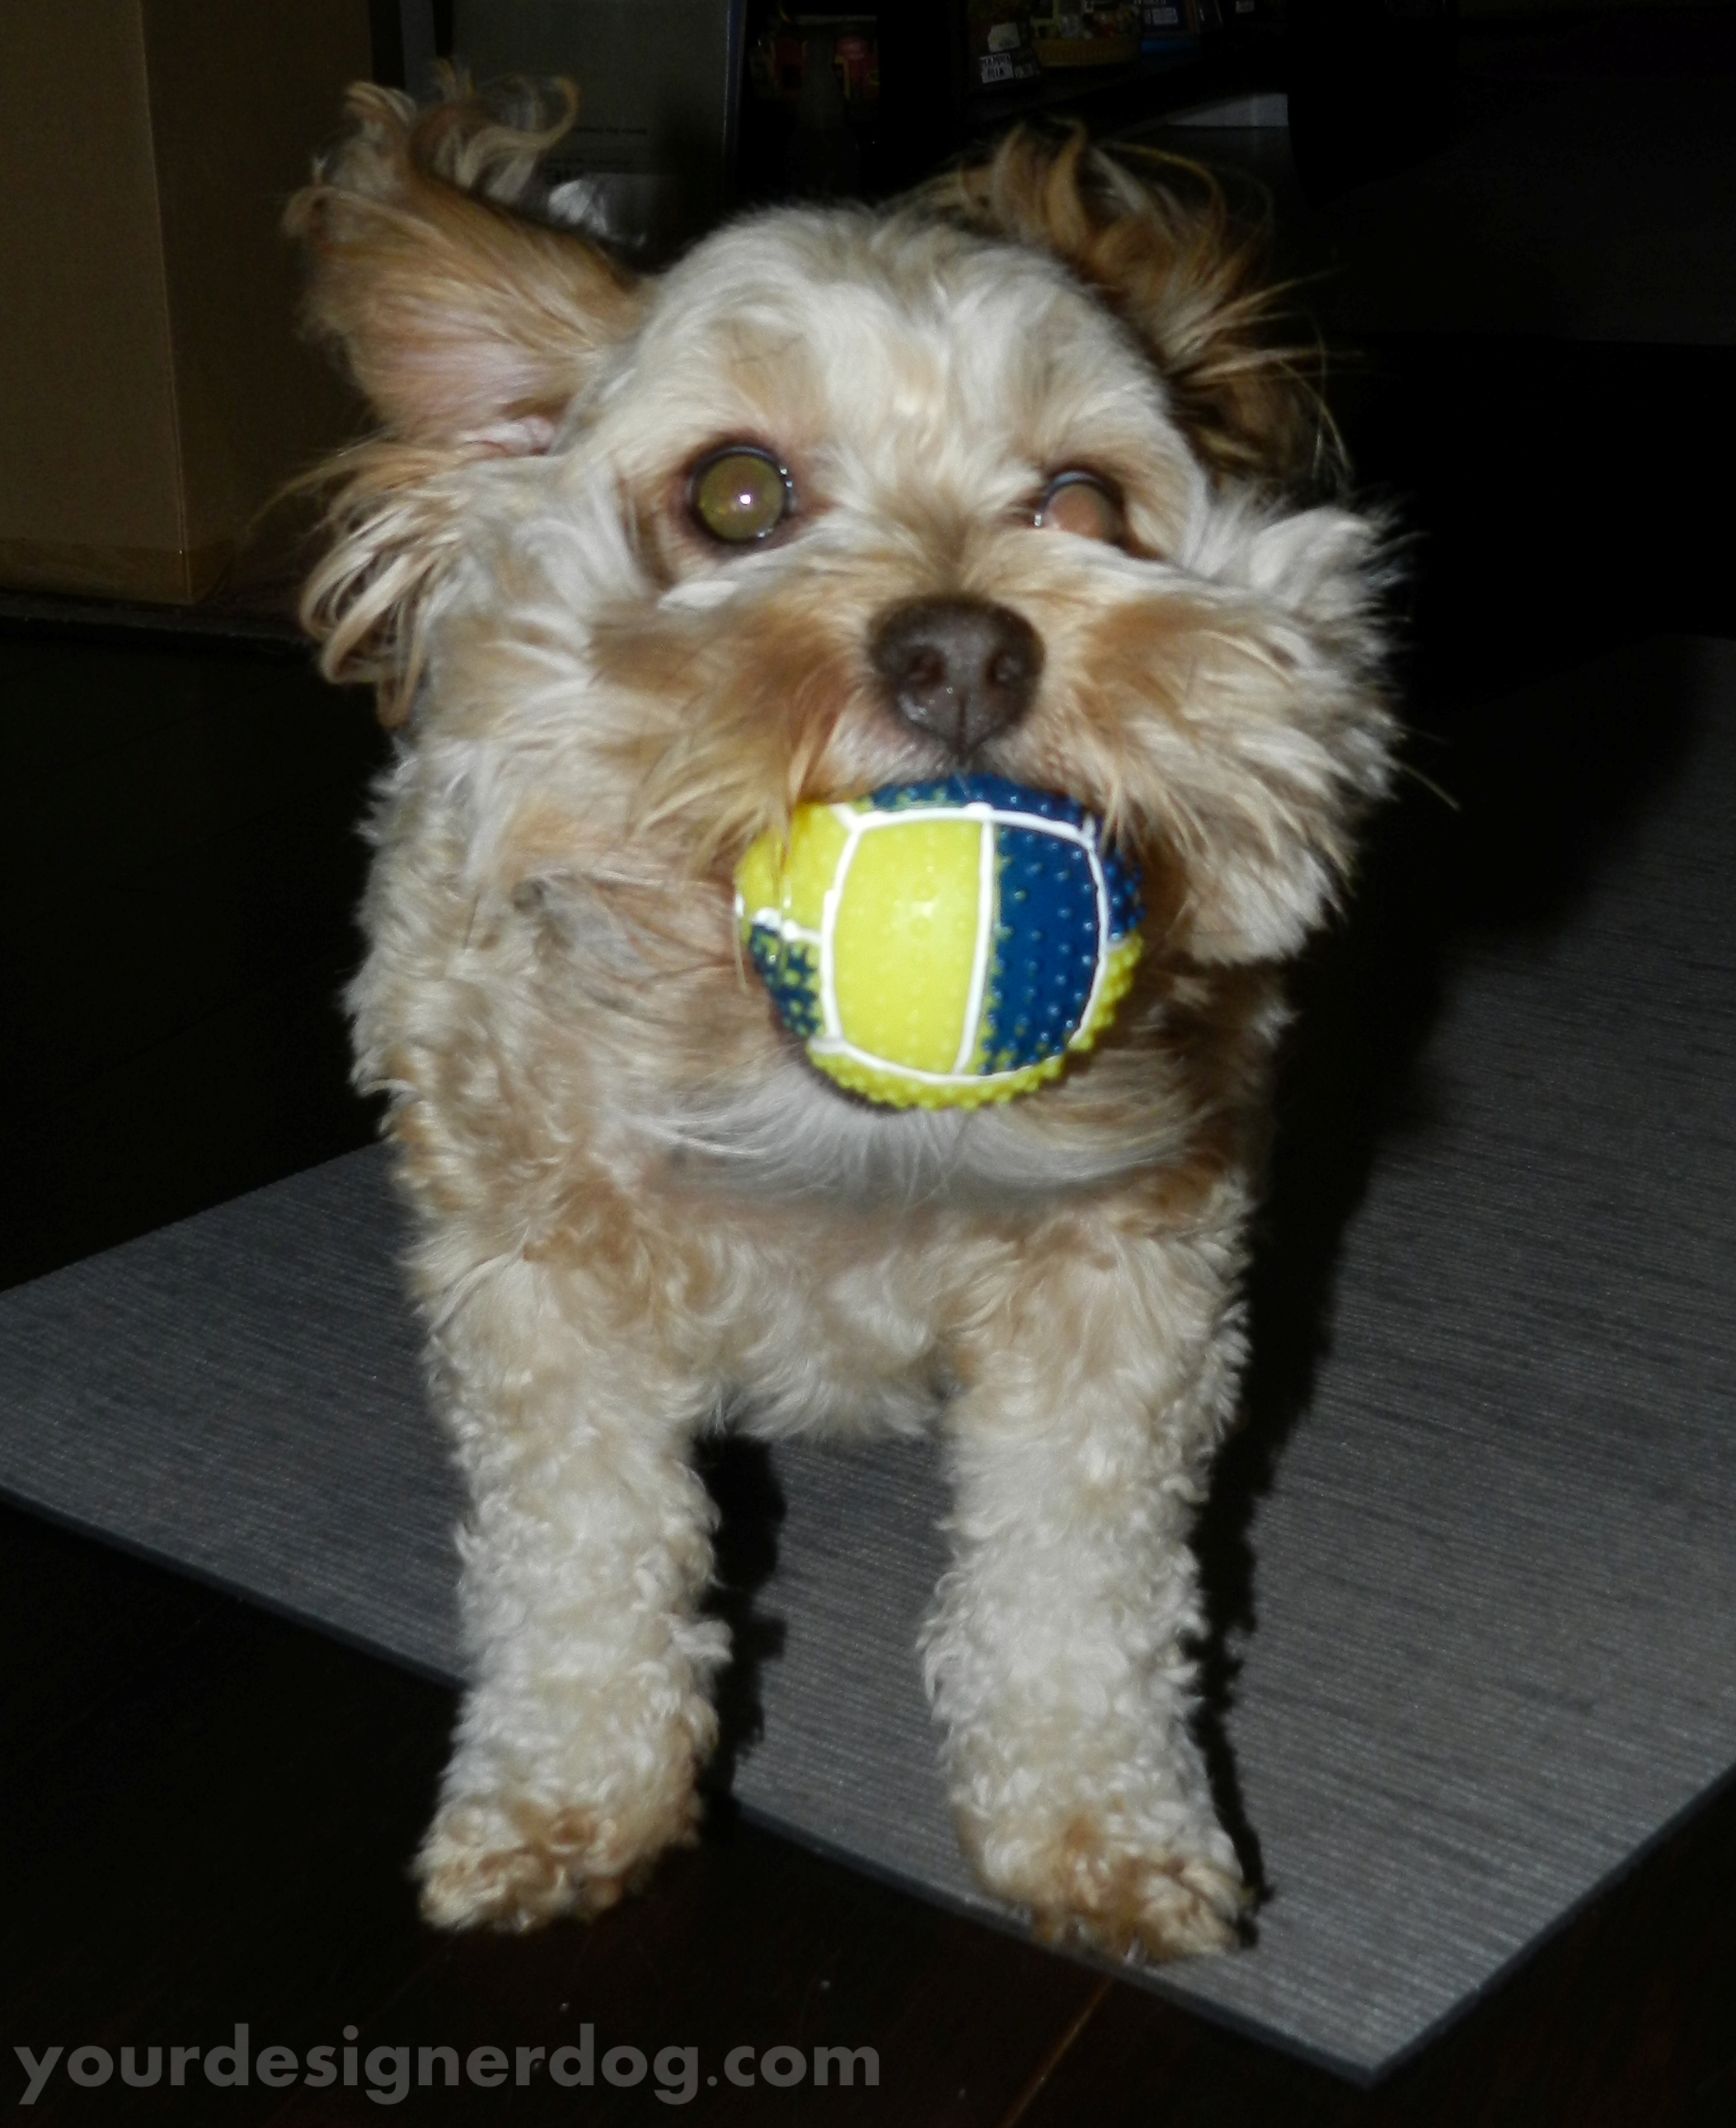 dogs, designer dogs, yorkipoo, yorkie poo, catch, squeaky ball, dog toy